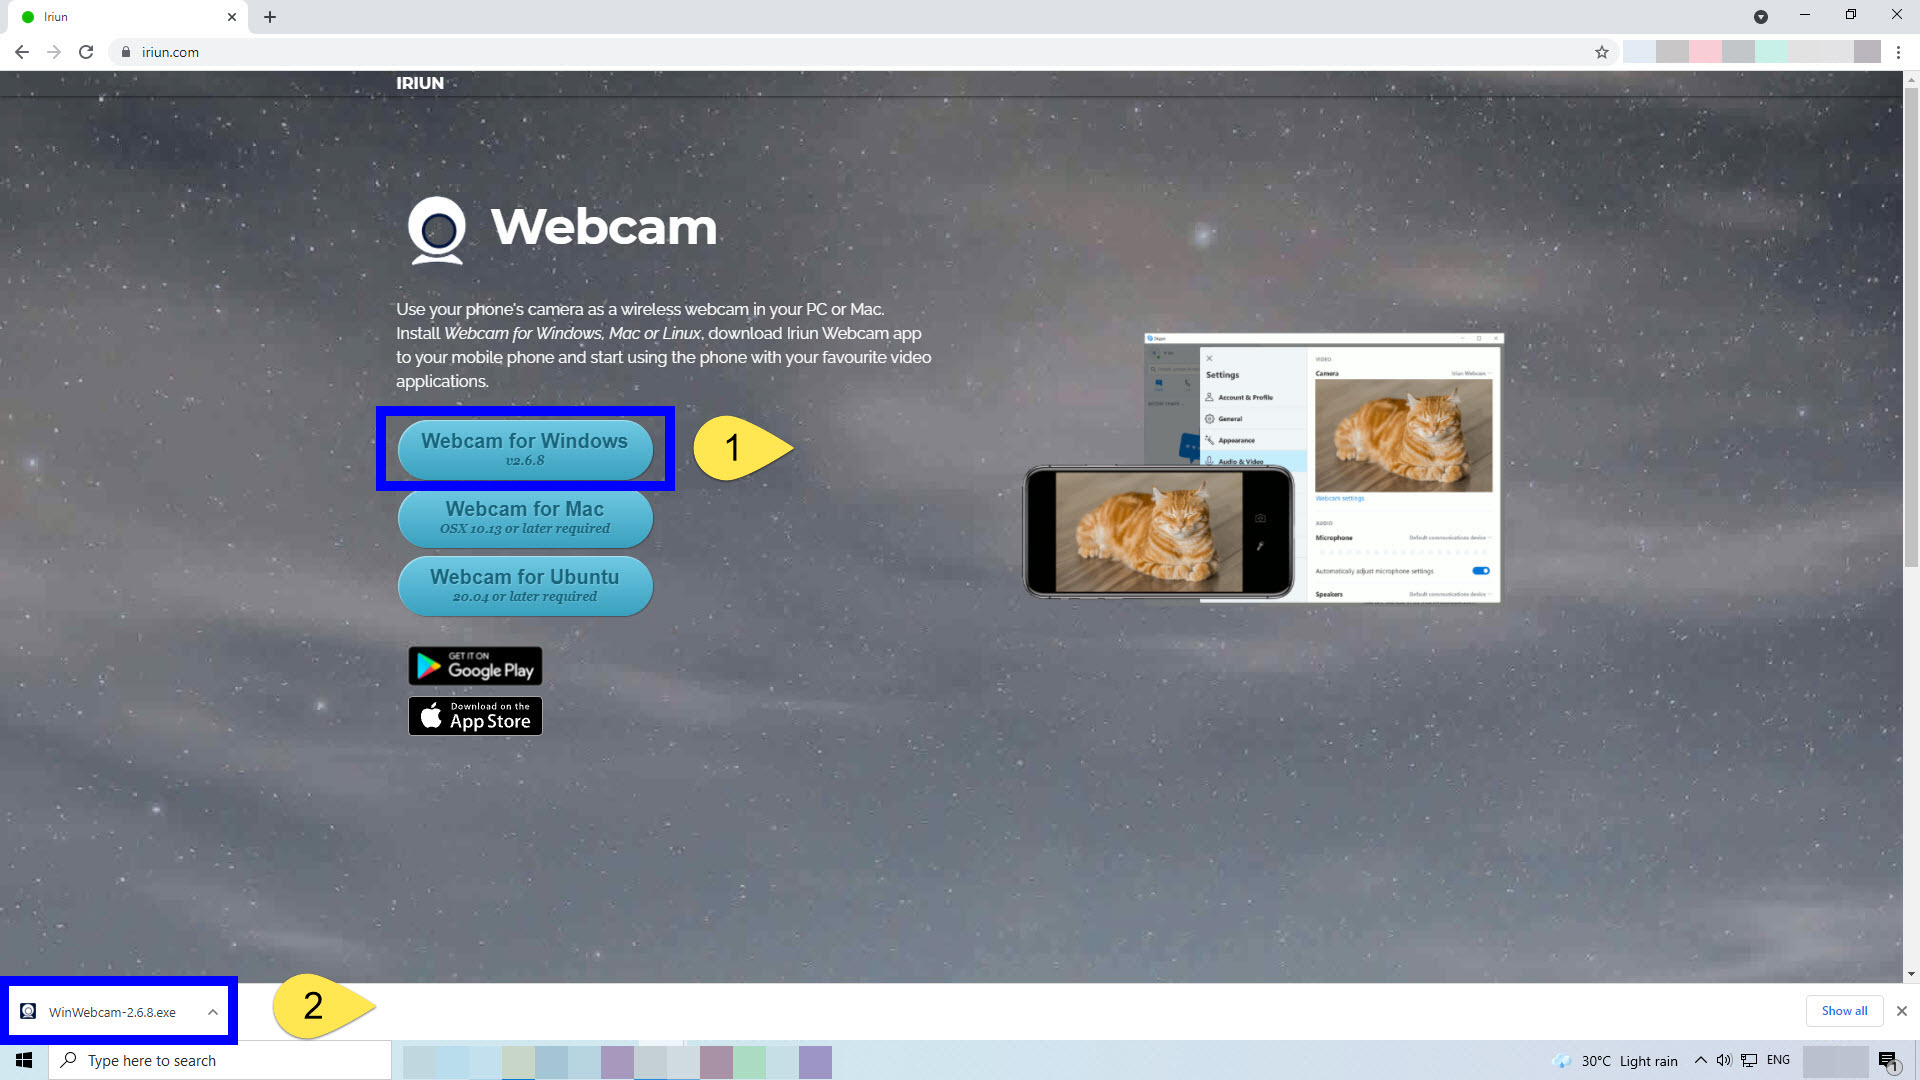 click and download Webcam for Windows option